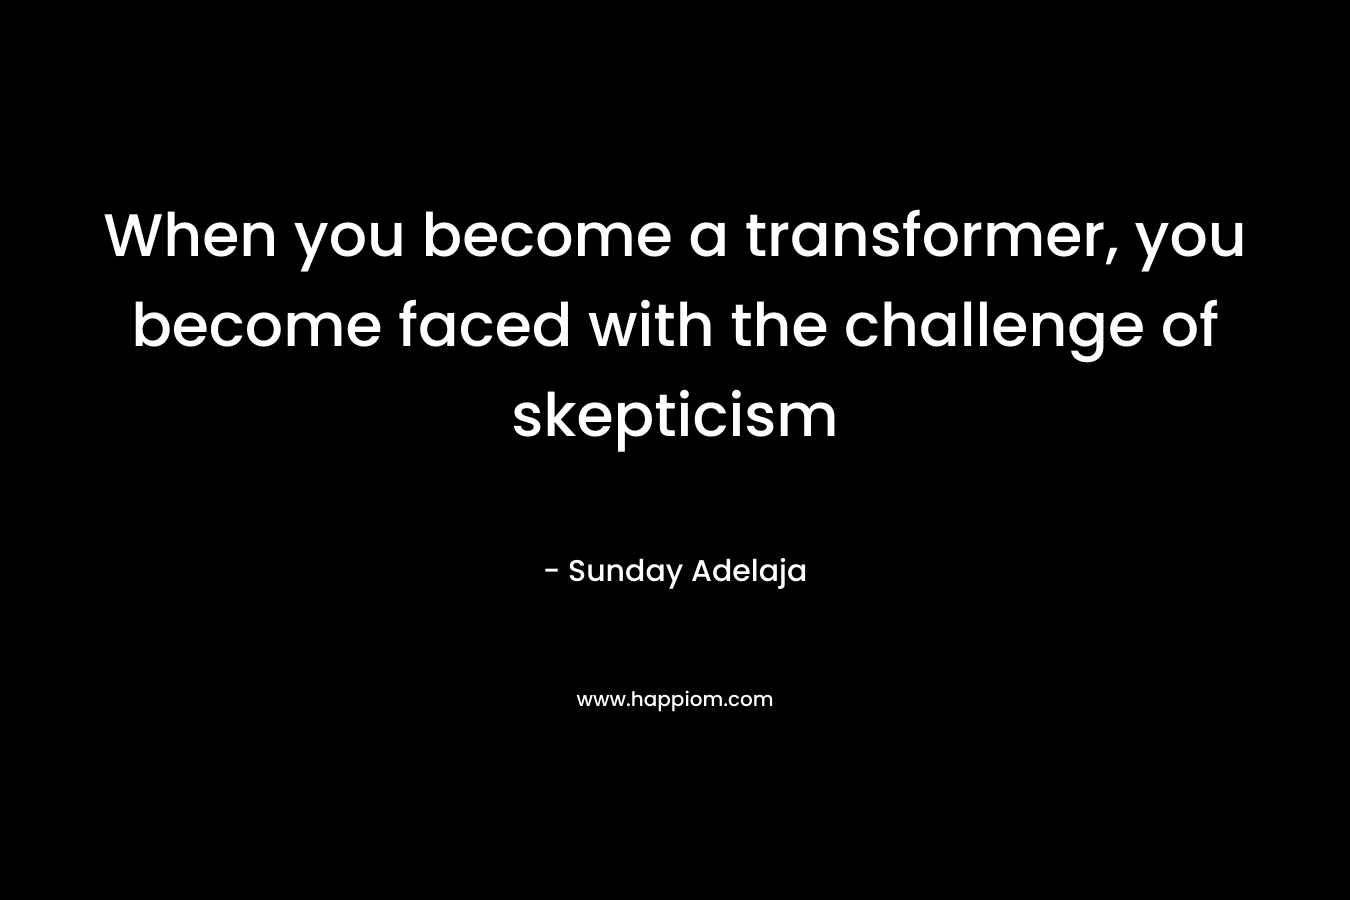 When you become a transformer, you become faced with the challenge of skepticism